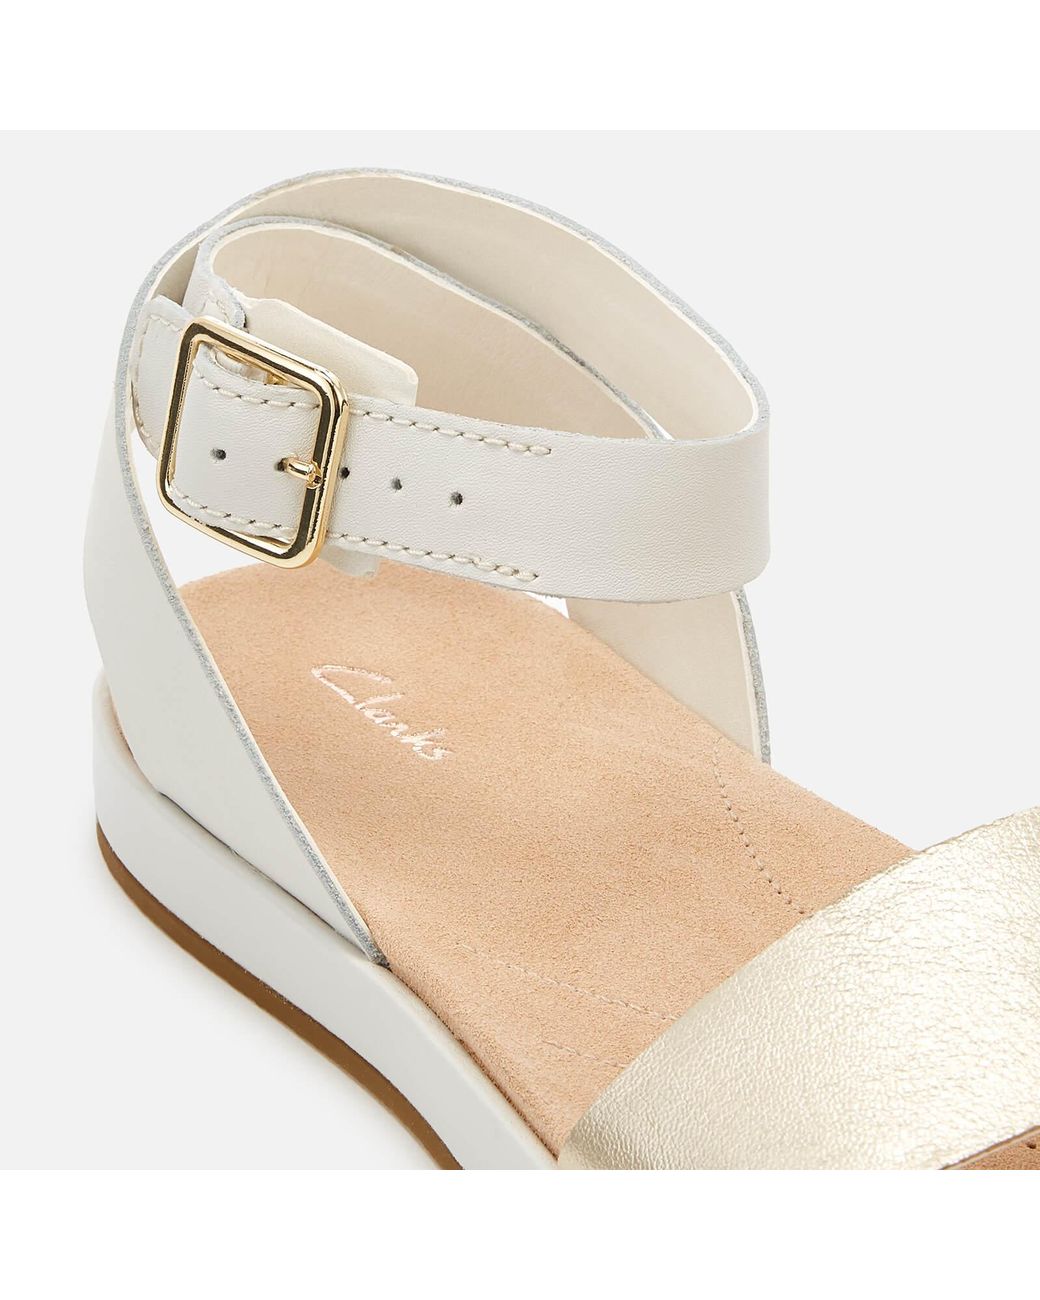 Clarks Leather Botanic Ivy Sandals in White | Lyst